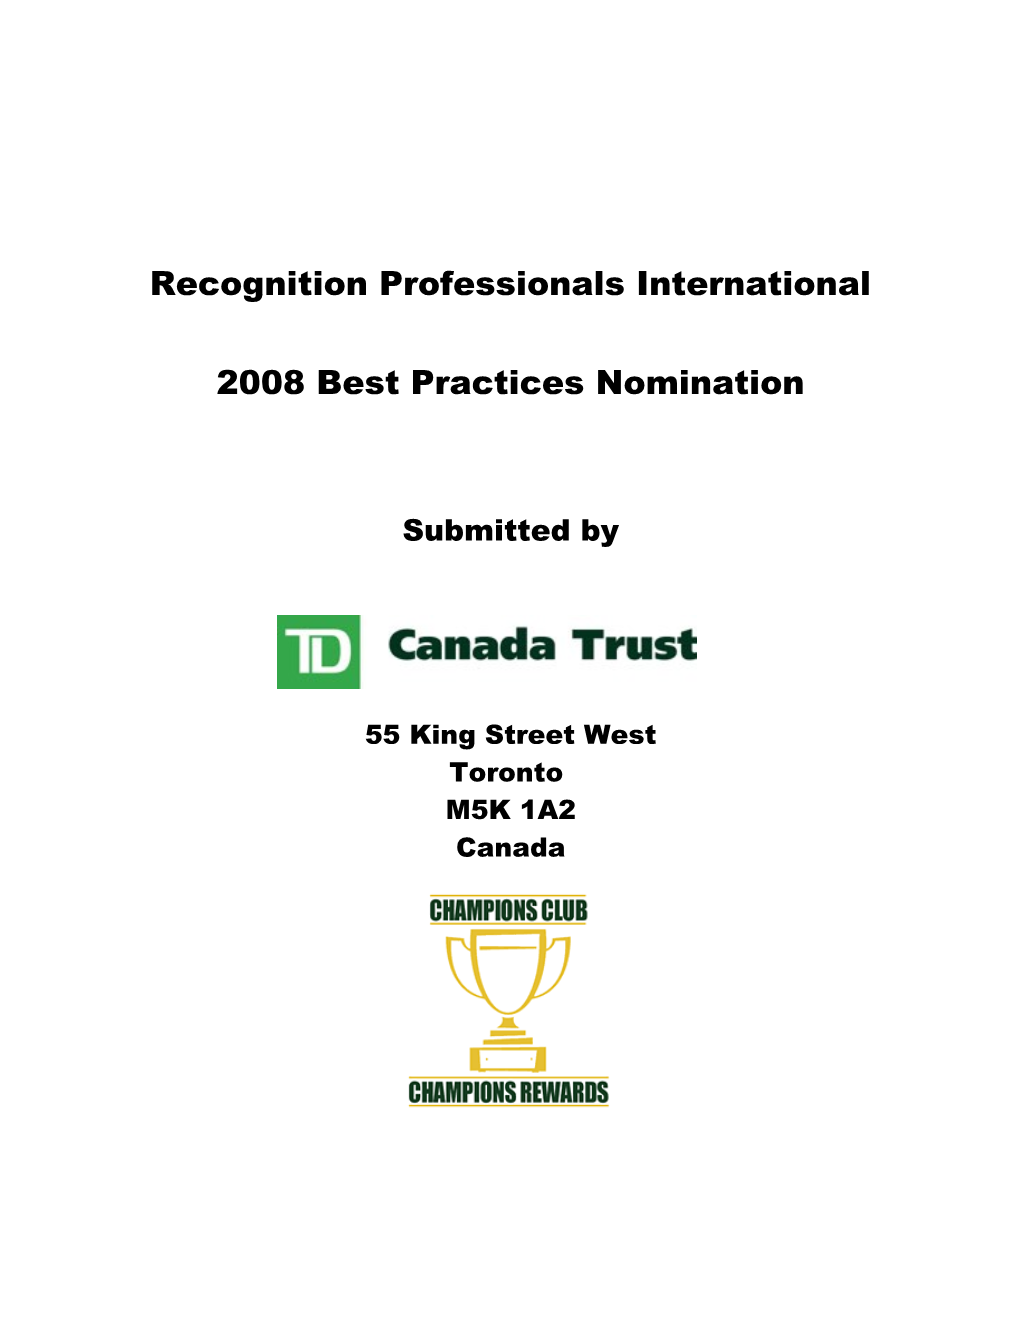 NAER Best Practices 2007